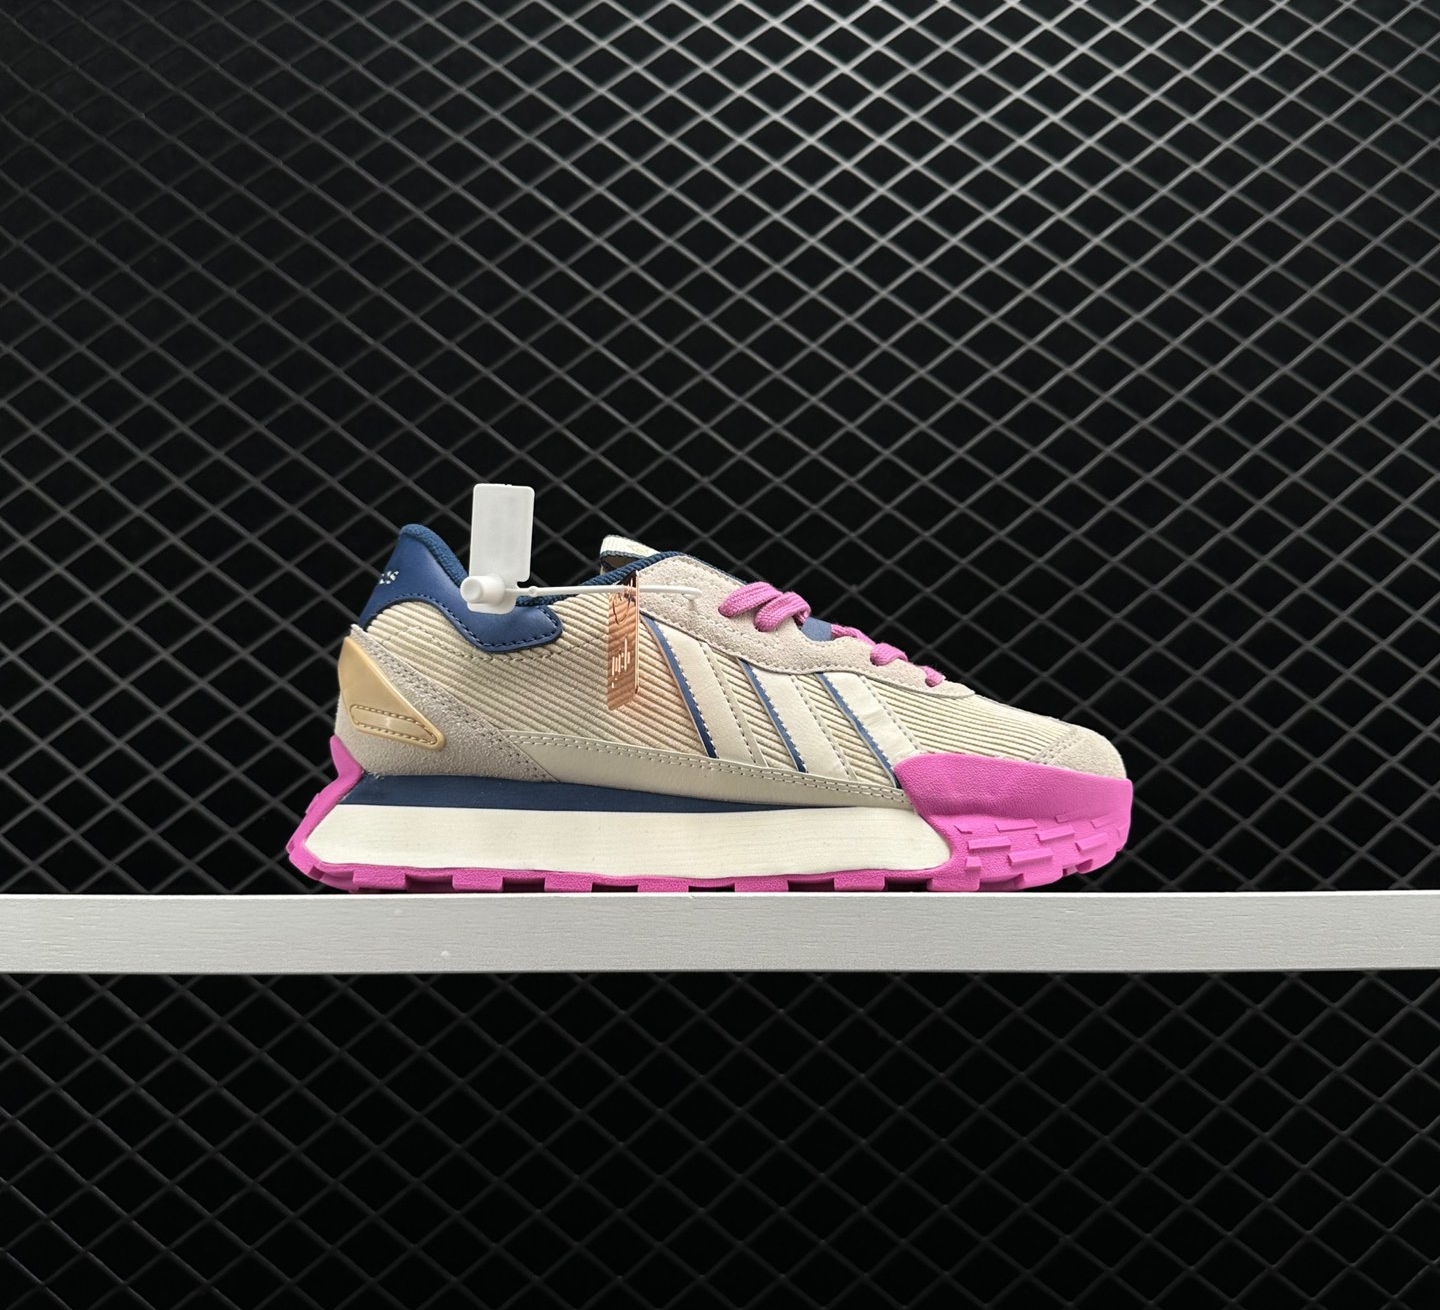 Adidas Neo Futro Mixr FM White Blue Pink HP9829 - Stylish and Trendy Sneakers